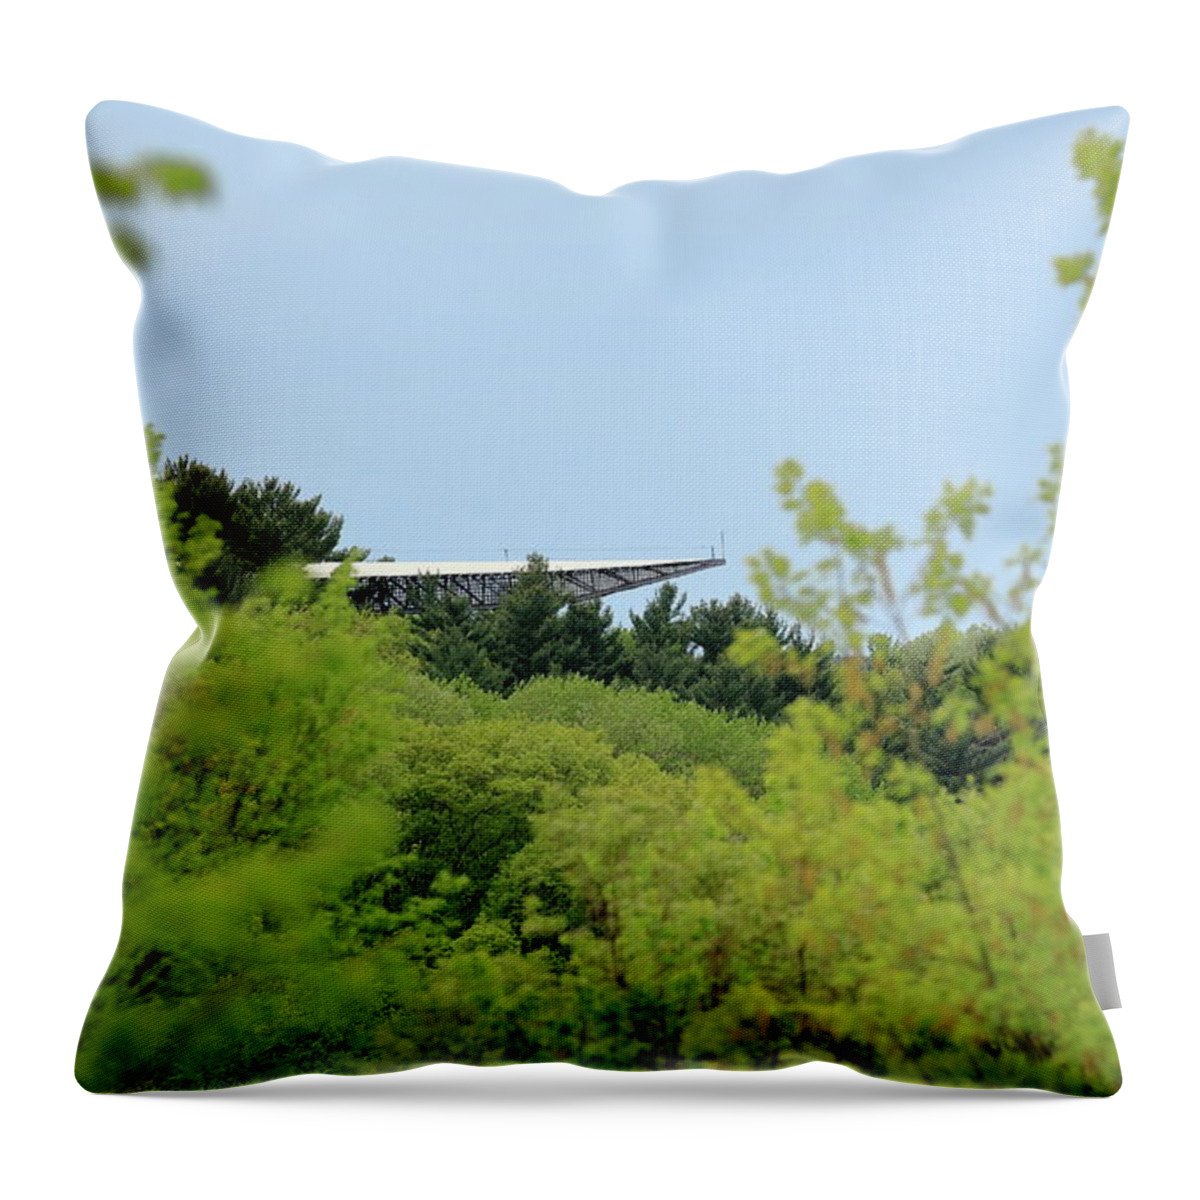 Wisconsin Throw Pillow featuring the photograph House On The Rock by Lens Art Photography By Larry Trager